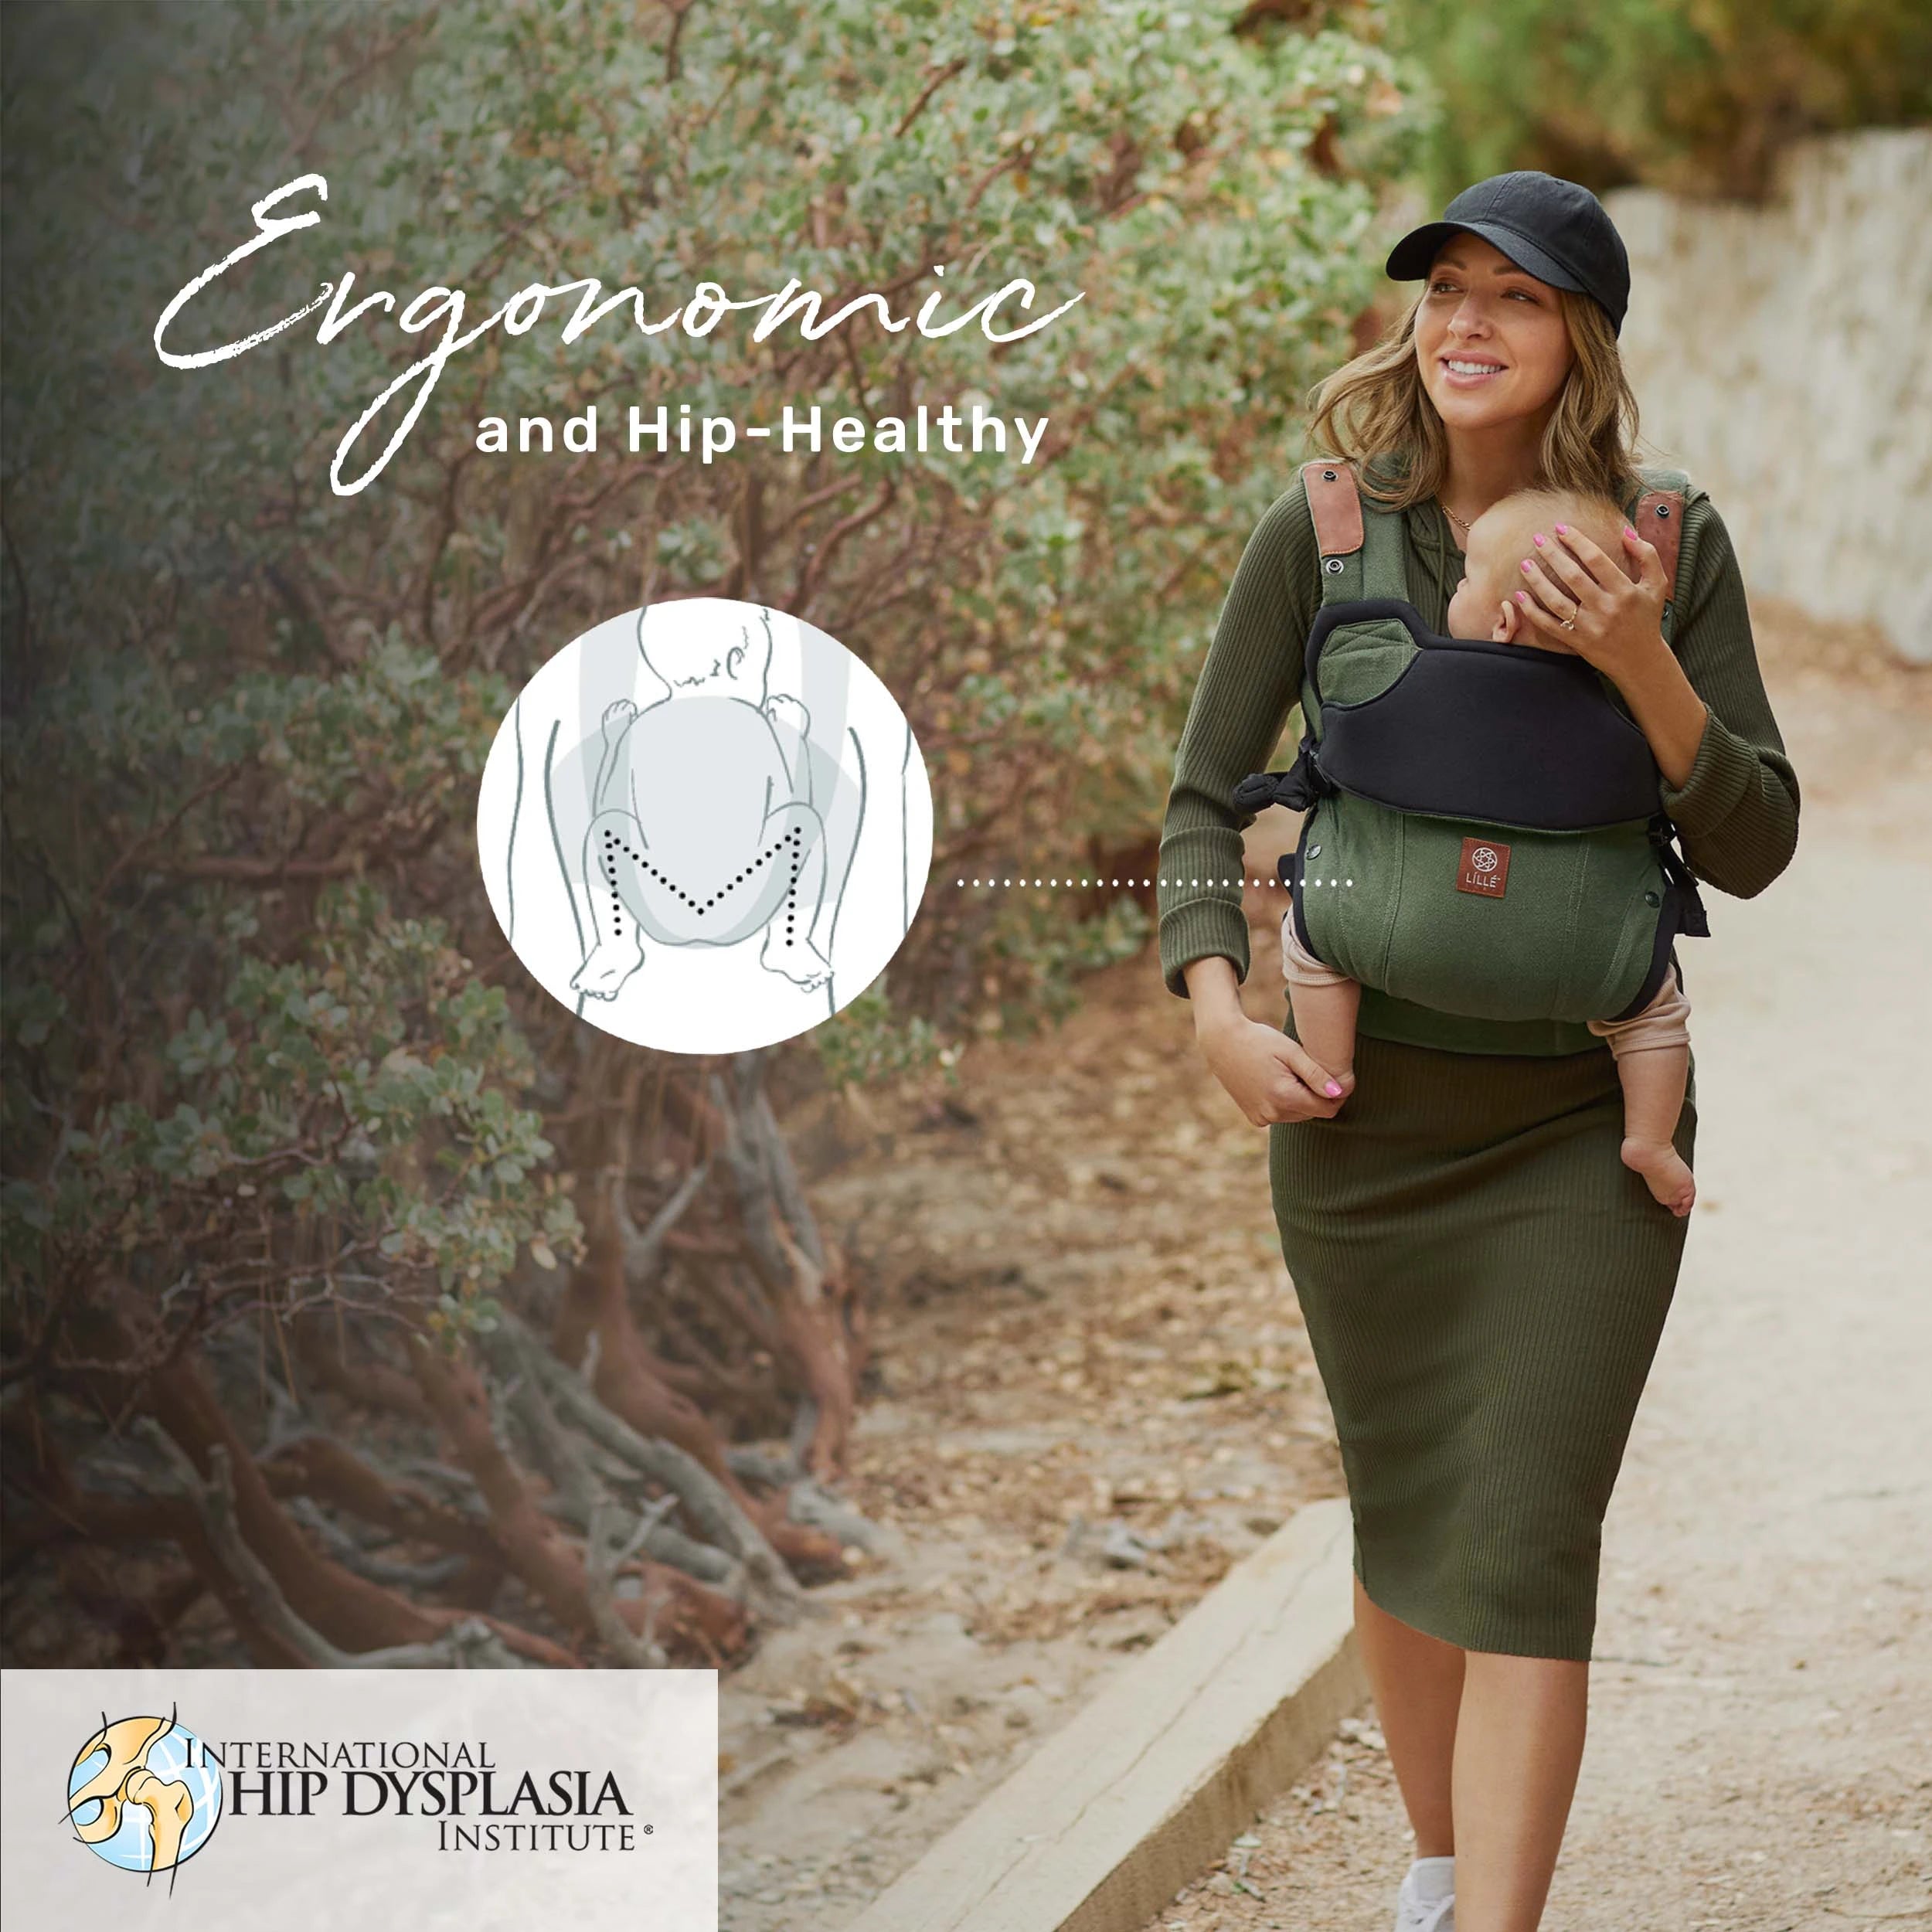 Elevate carrier images shows carrier support for baby. Ergonomic, hip healthy and endorsed by international hip dysplasia institute.